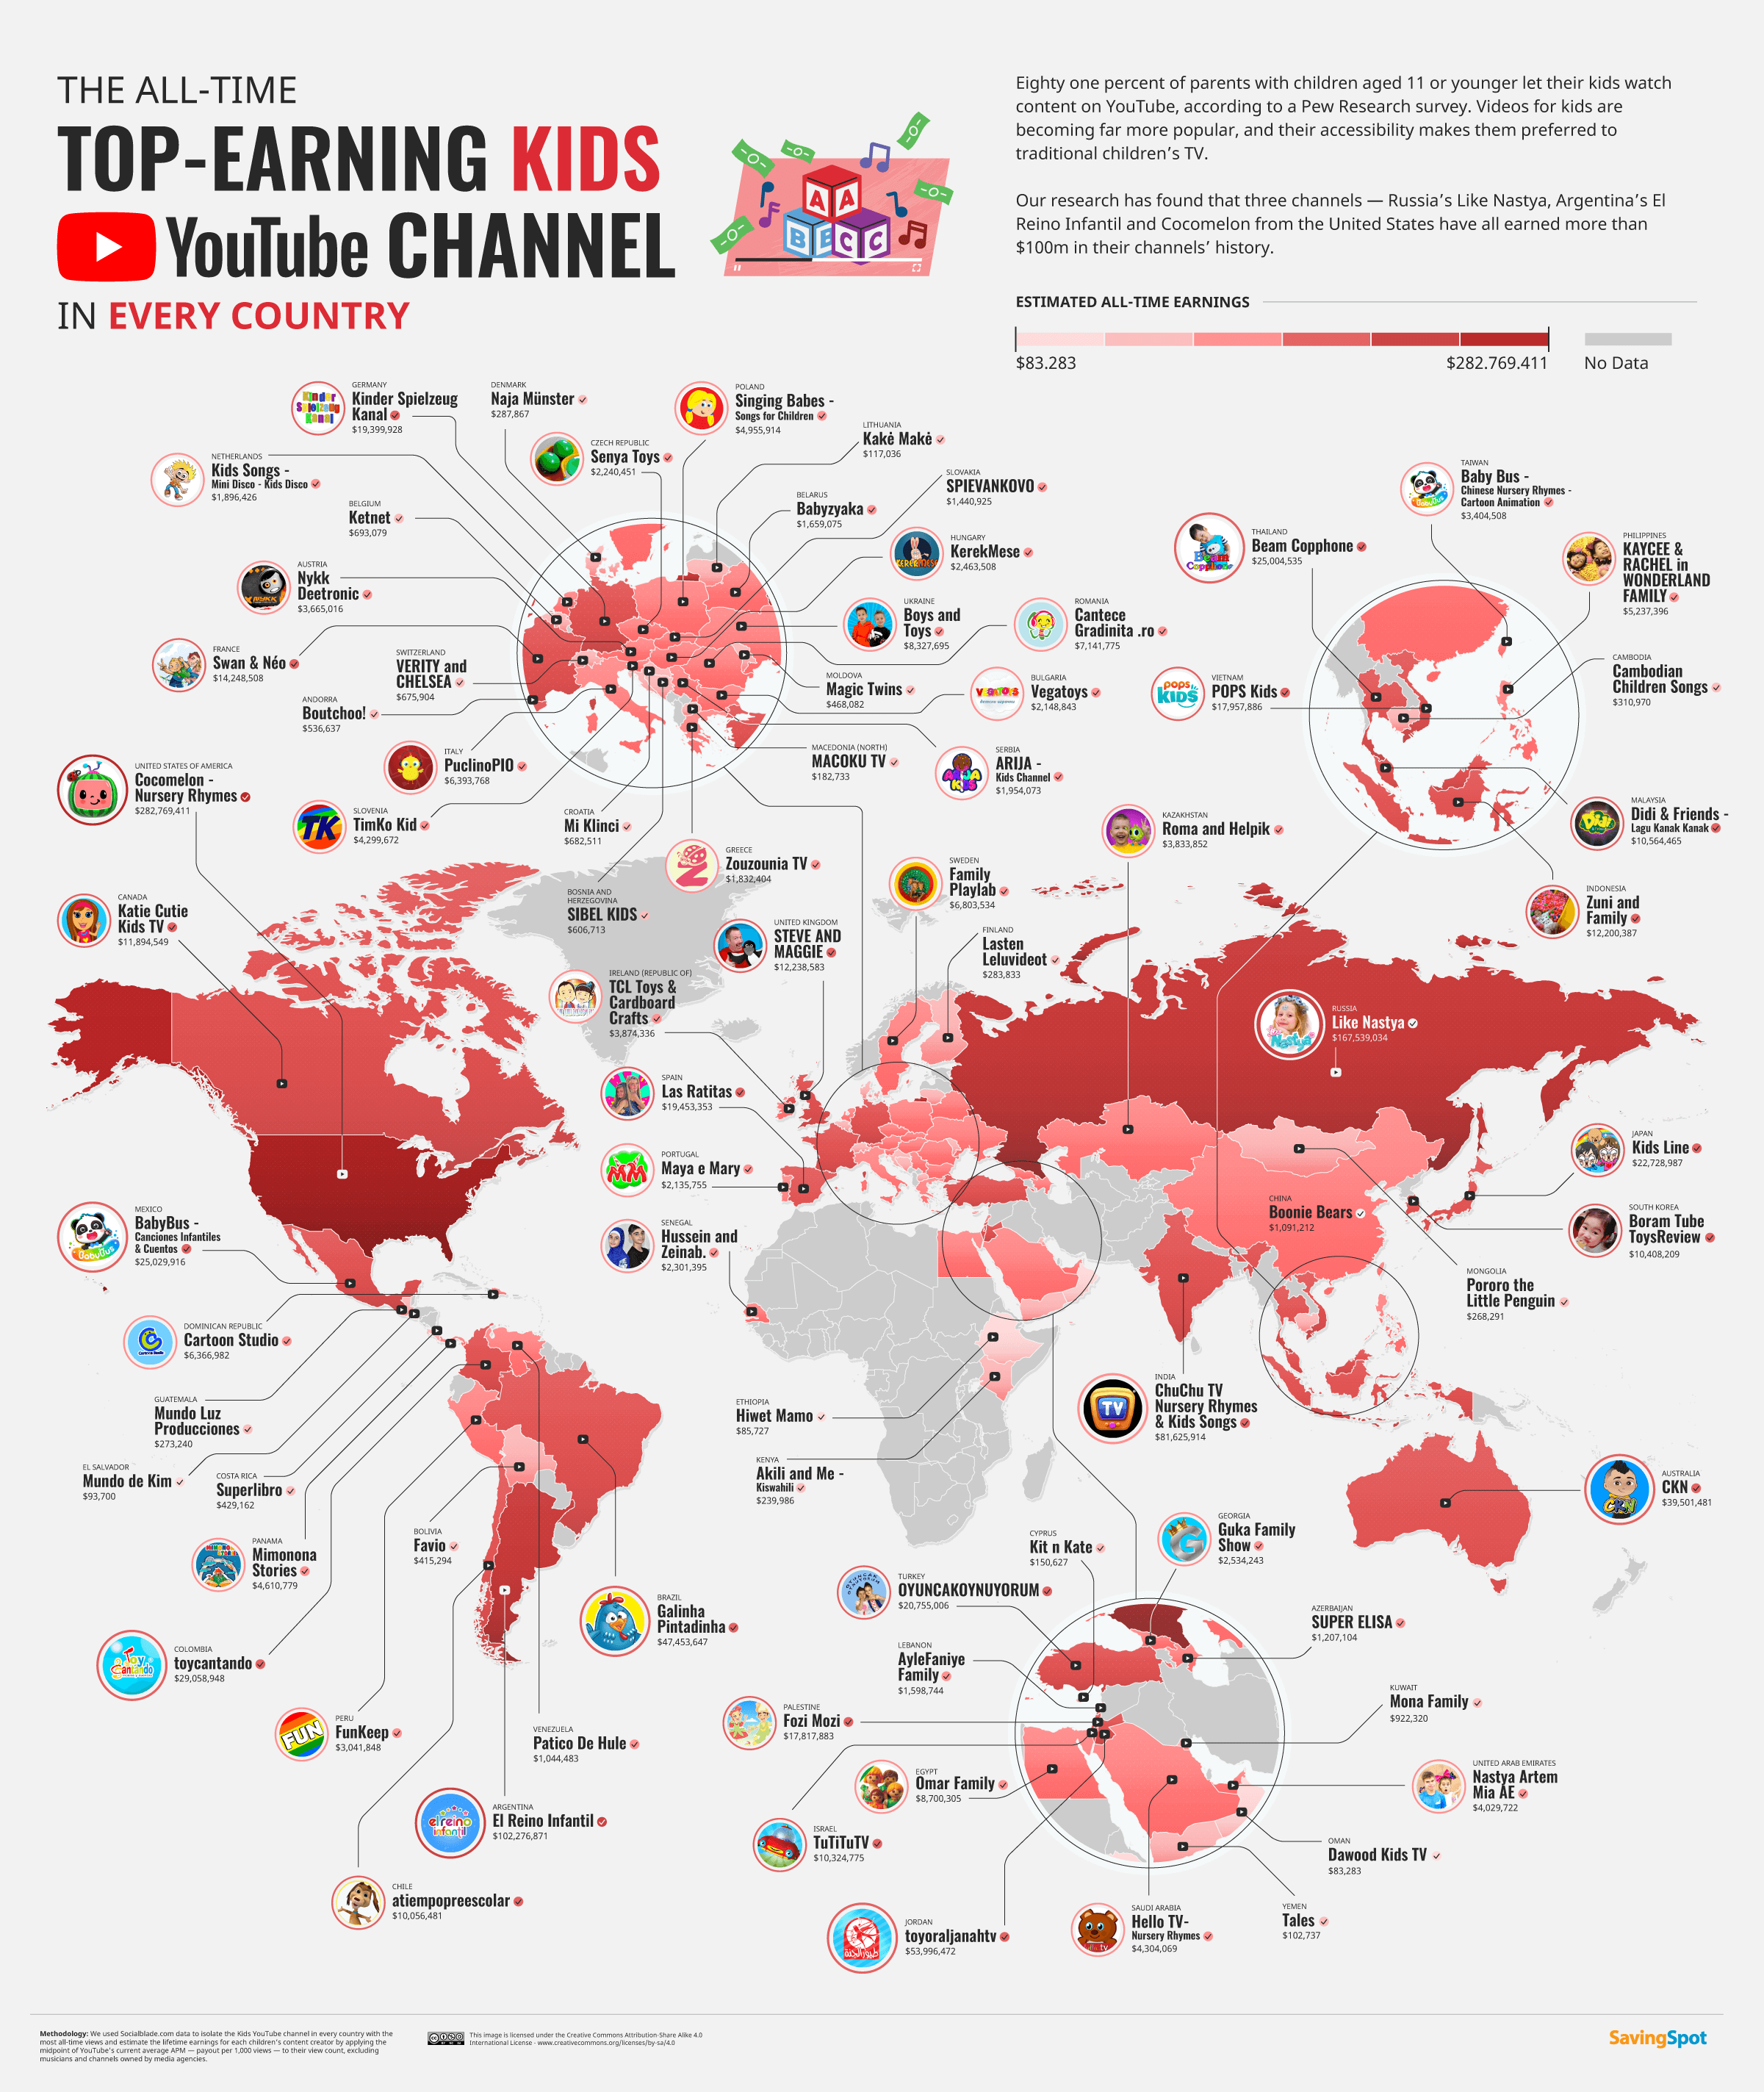 The Top Earning Kids YouTuber in Every Country World